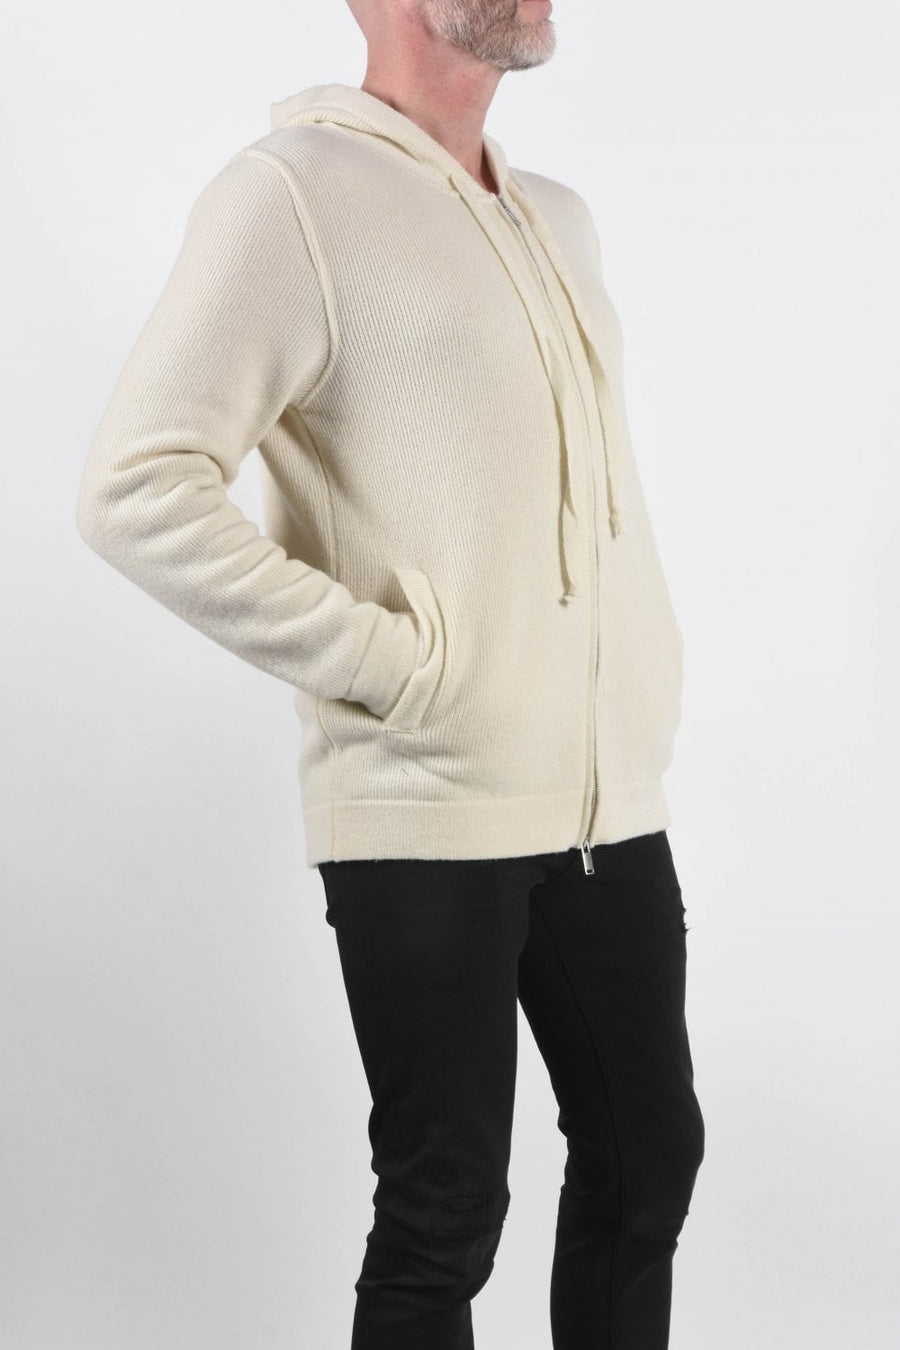 Buy the Daniele Fiesoli Zip Up Knit Hoodie Cream at Intro. Spend £50 for free UK delivery. Official stockists. We ship worldwide.